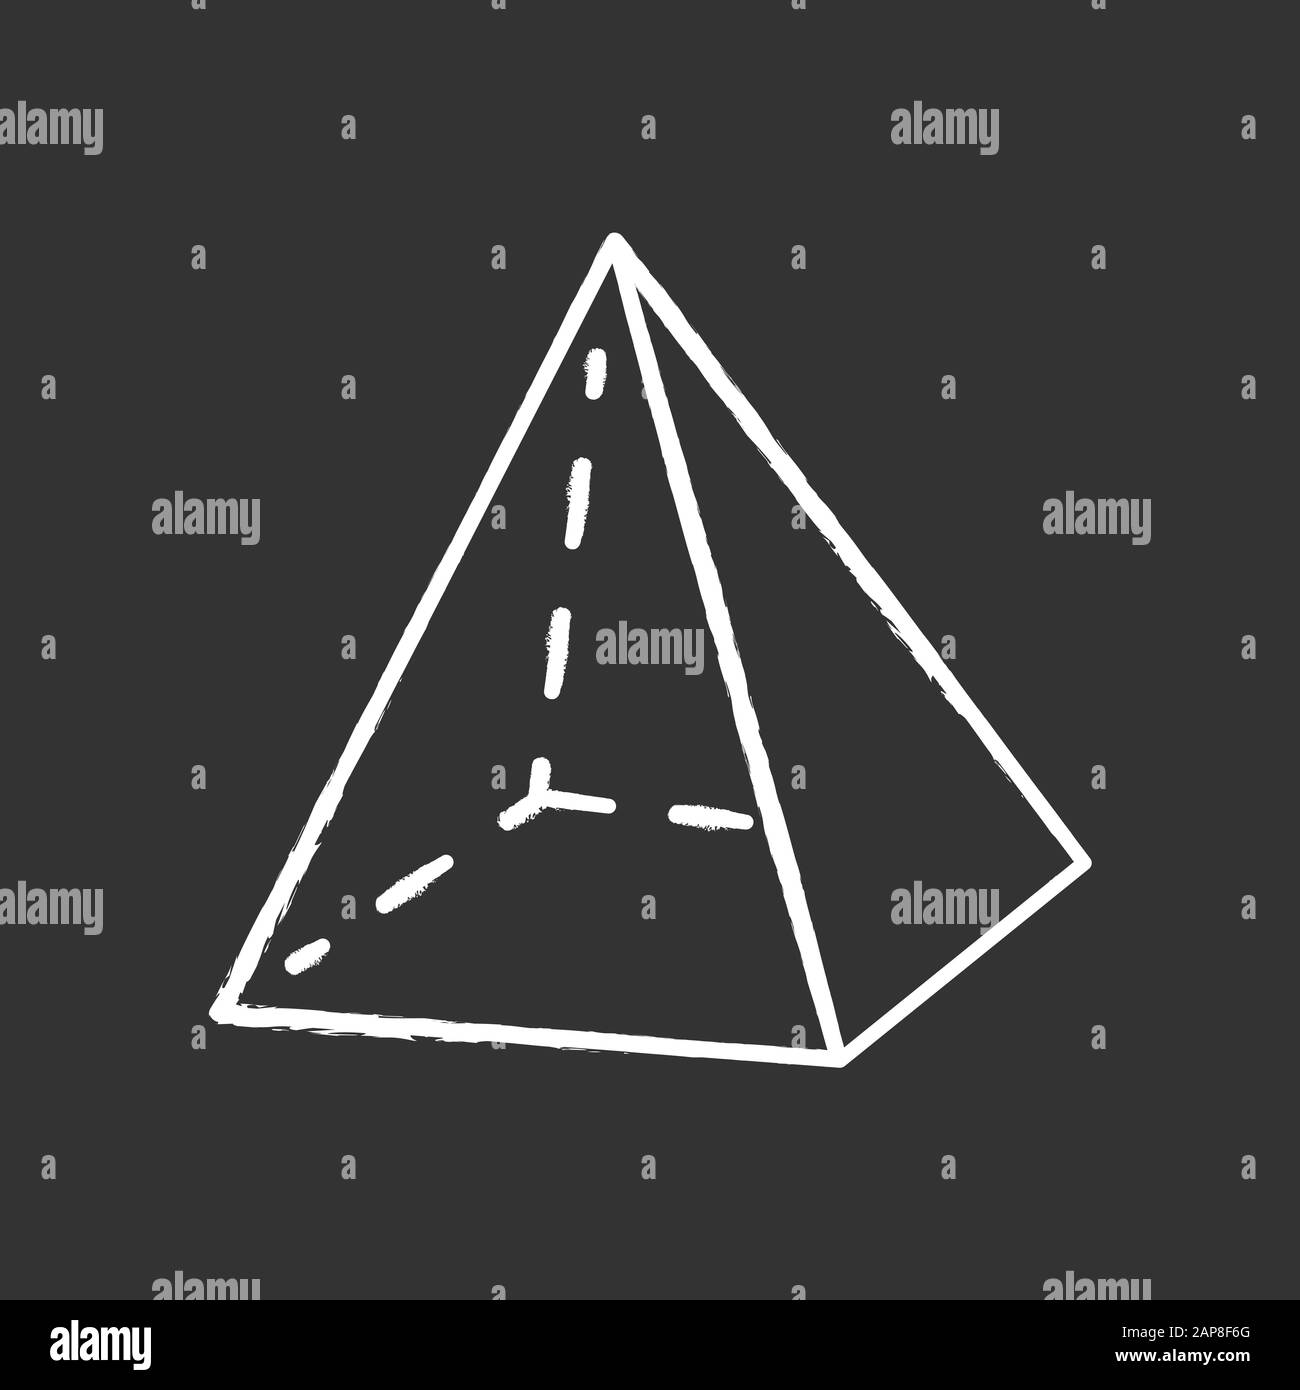 Pyramid chalk icon. Transparent geometric figure. Decorative simple element. Geometry dimensional model. Abstract shape. Isometric form with triangula Stock Vector